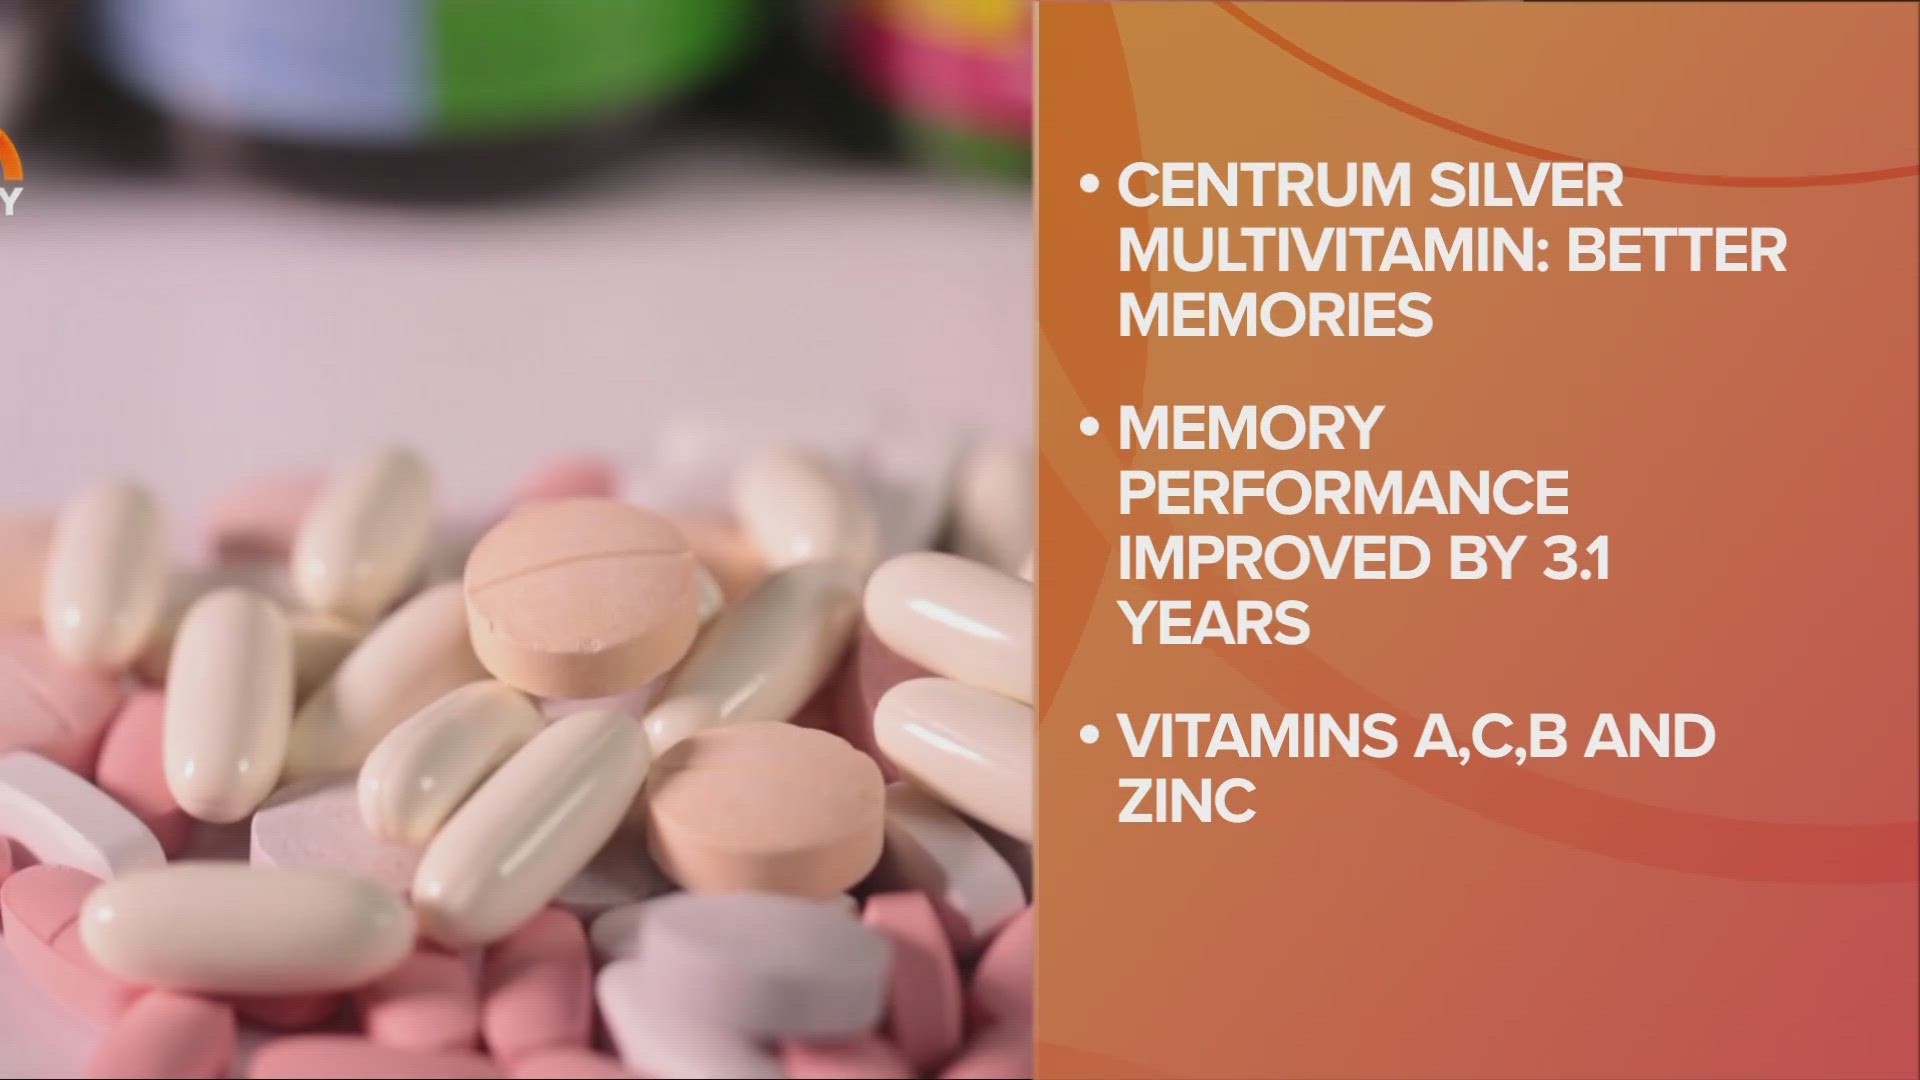 A recent trial found that people ages 60 and older who took a daily multivitamin showed an estimated 3.1 fewer years of memory loss than those who took a placebo.